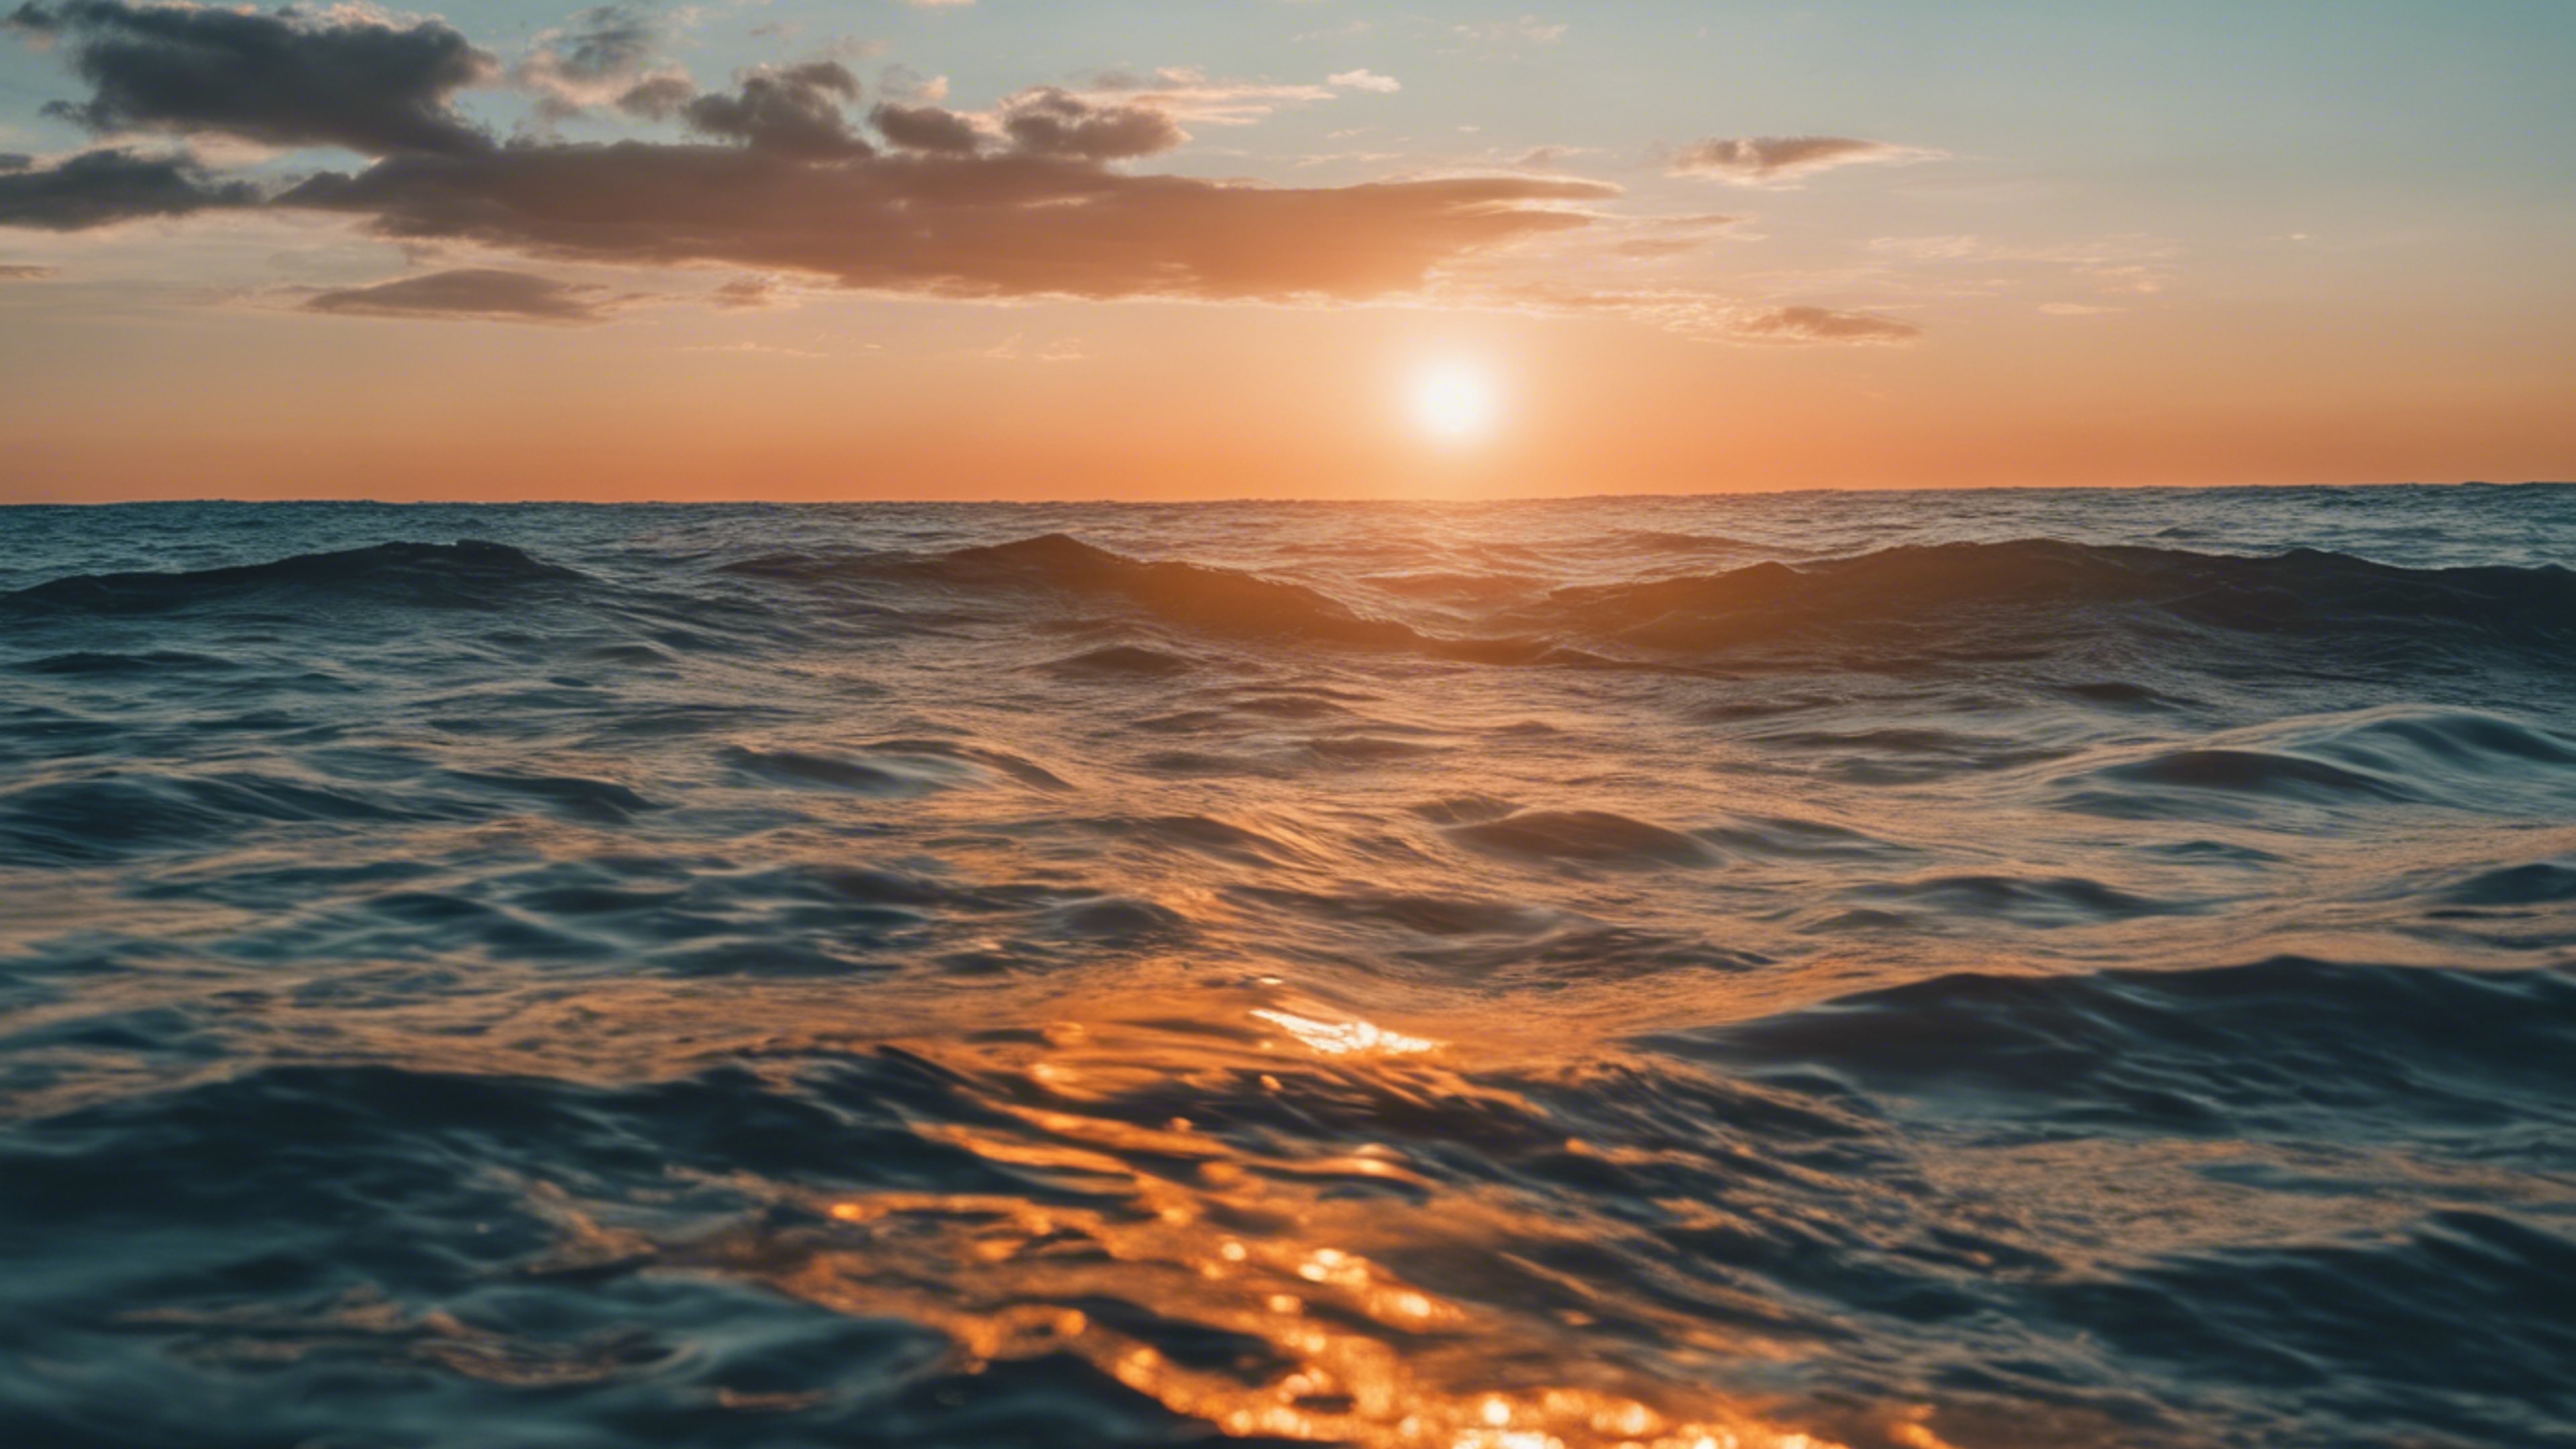 A sunset scene with orange sun setting in the cool blue ocean. Шпалери[7965154be6e2421b8d94]